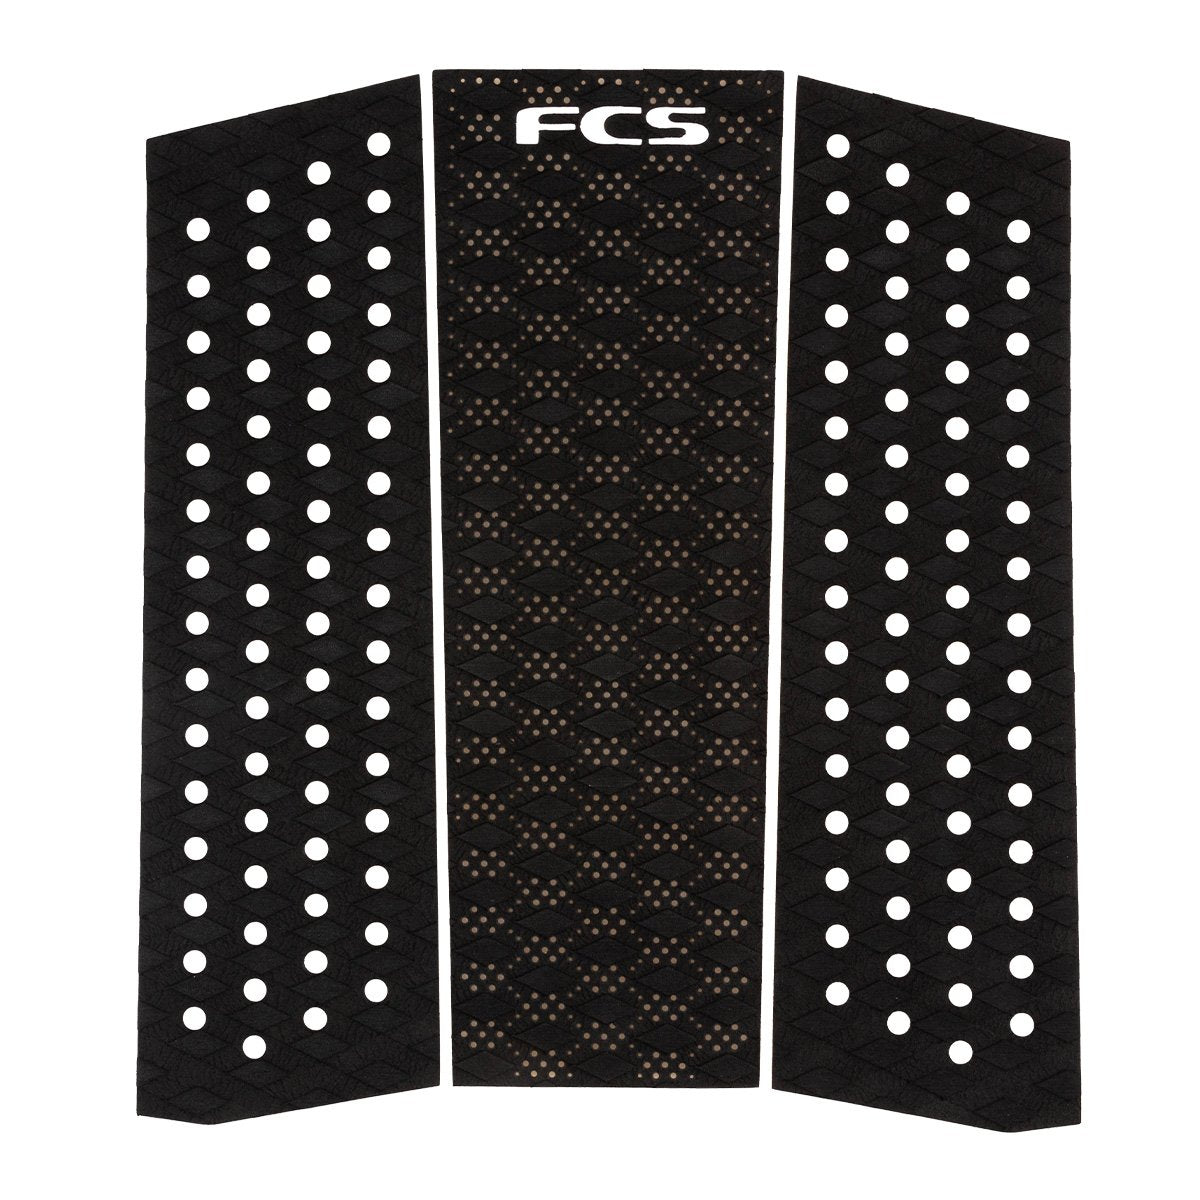 FCS T-3 ECO Mid Deck Traction